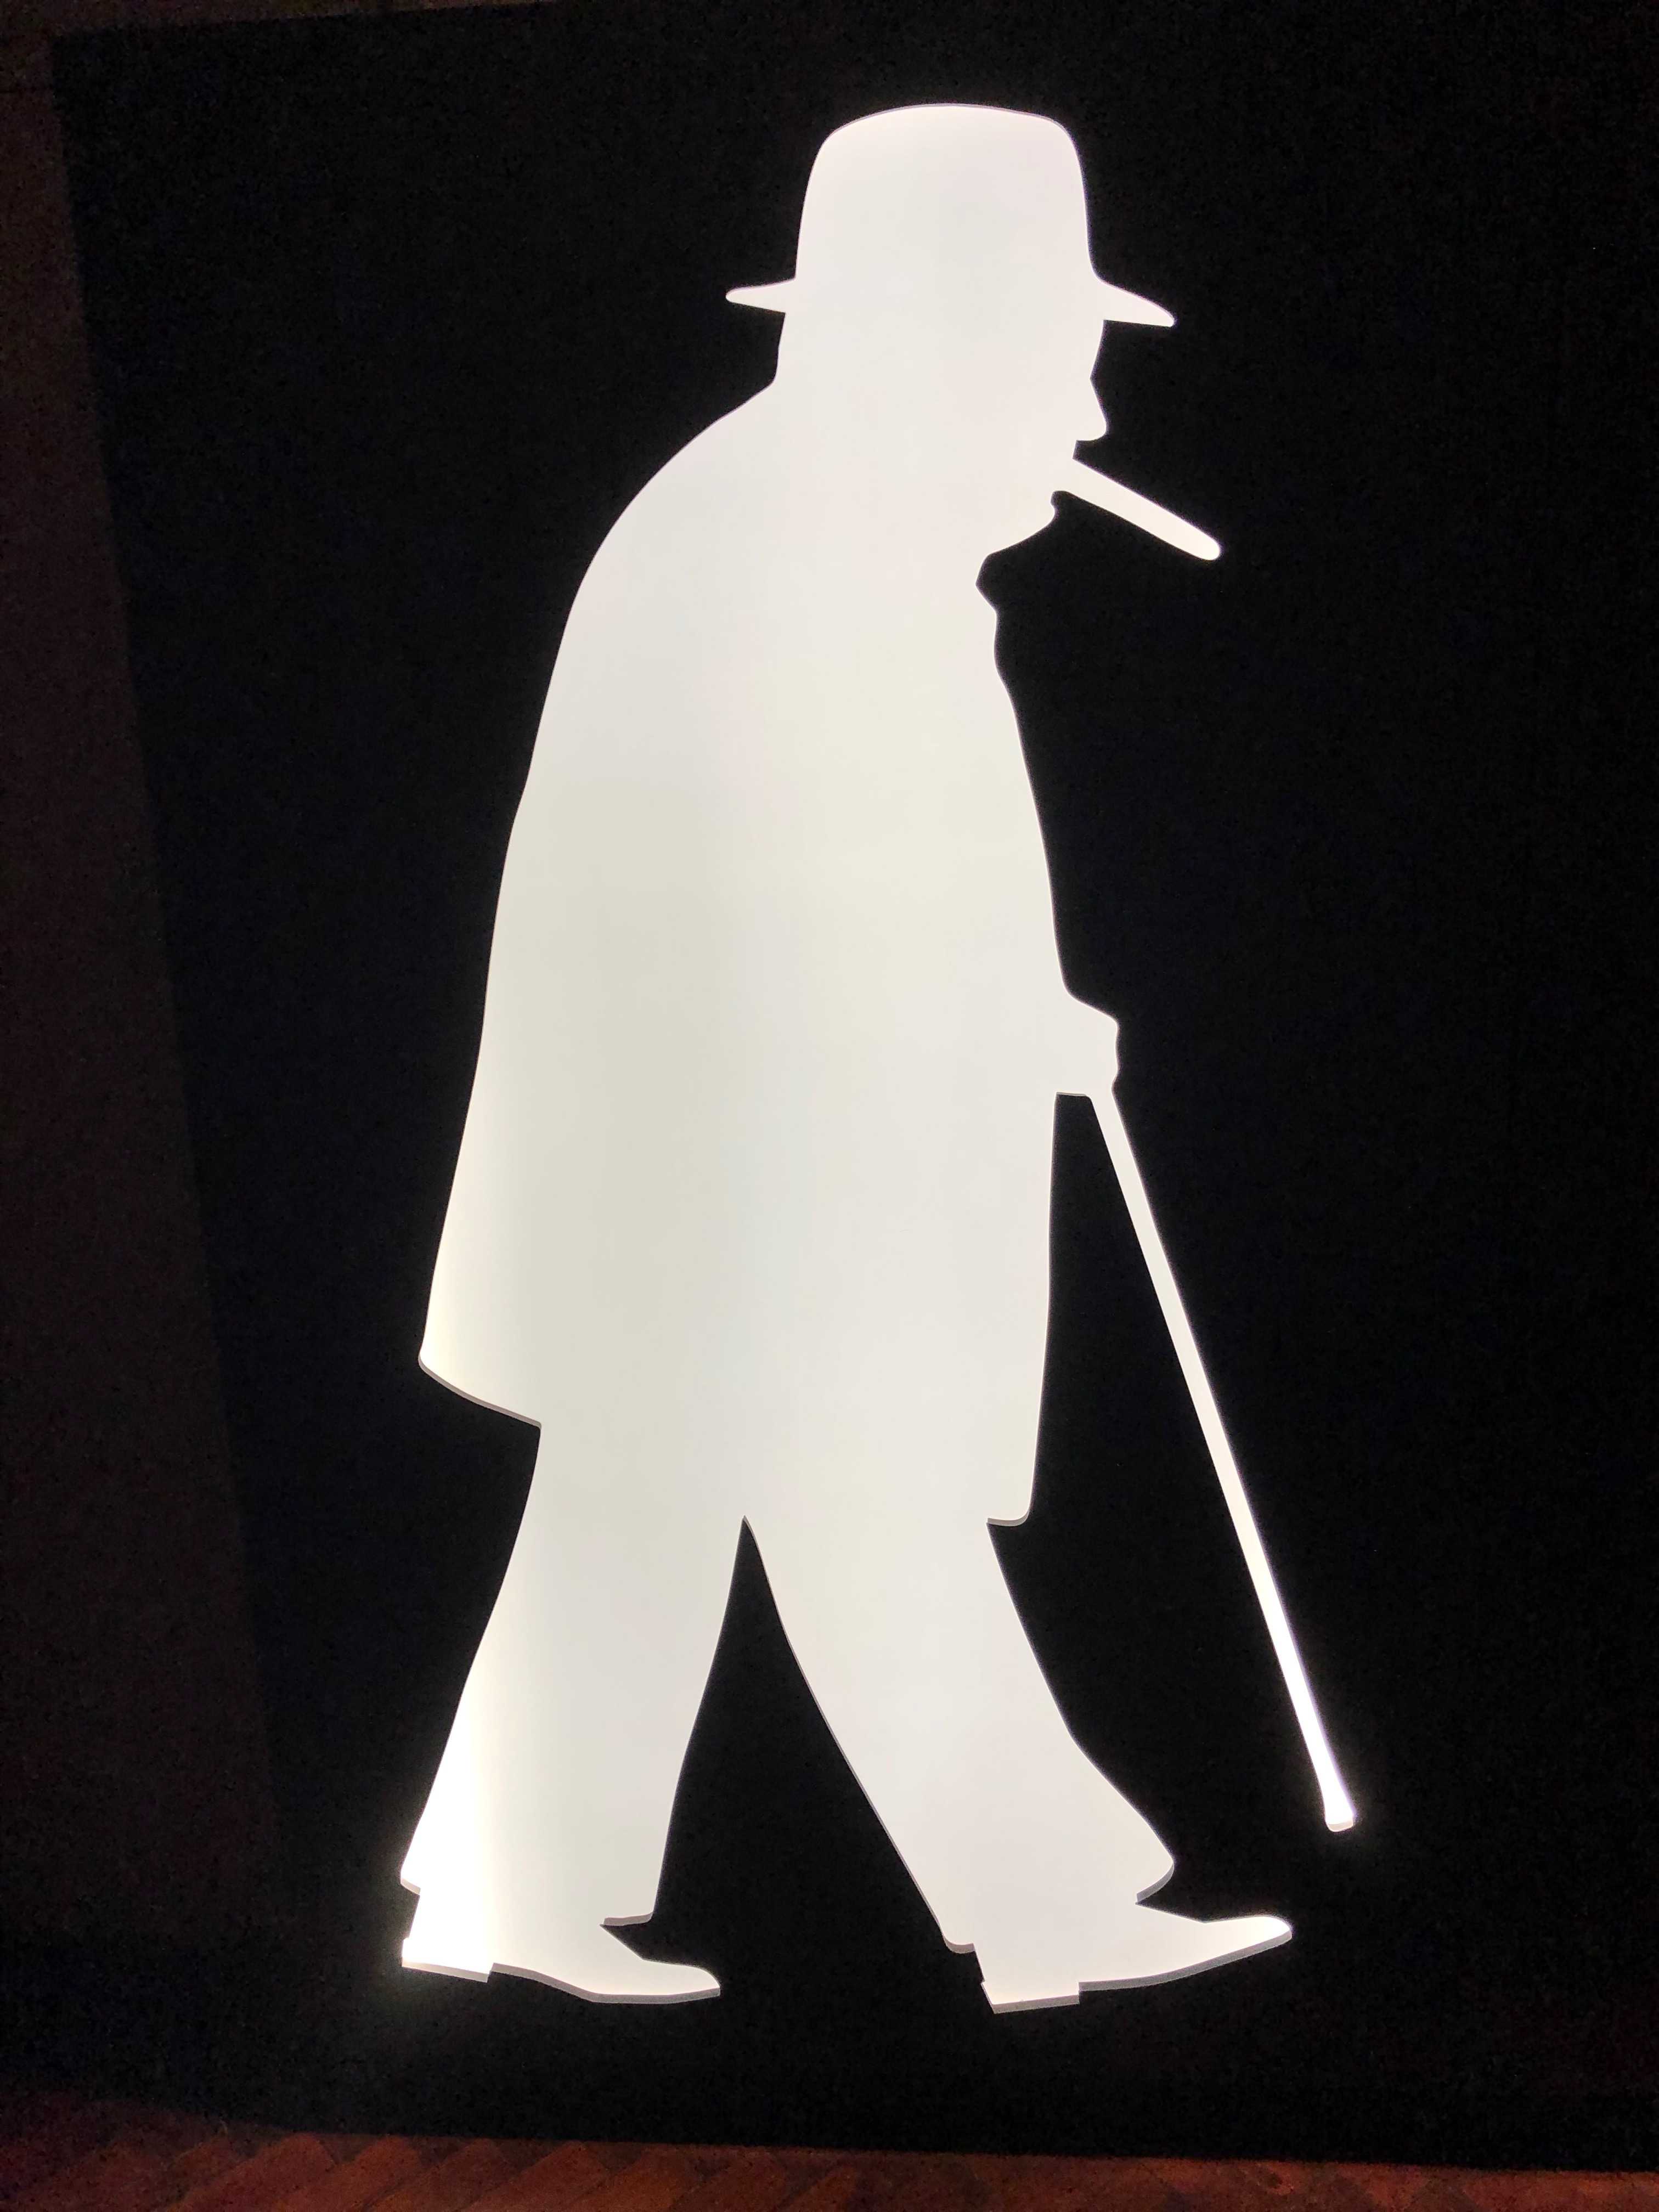 Cutout of Winston Churchill at the entrance to the Churchill Museum